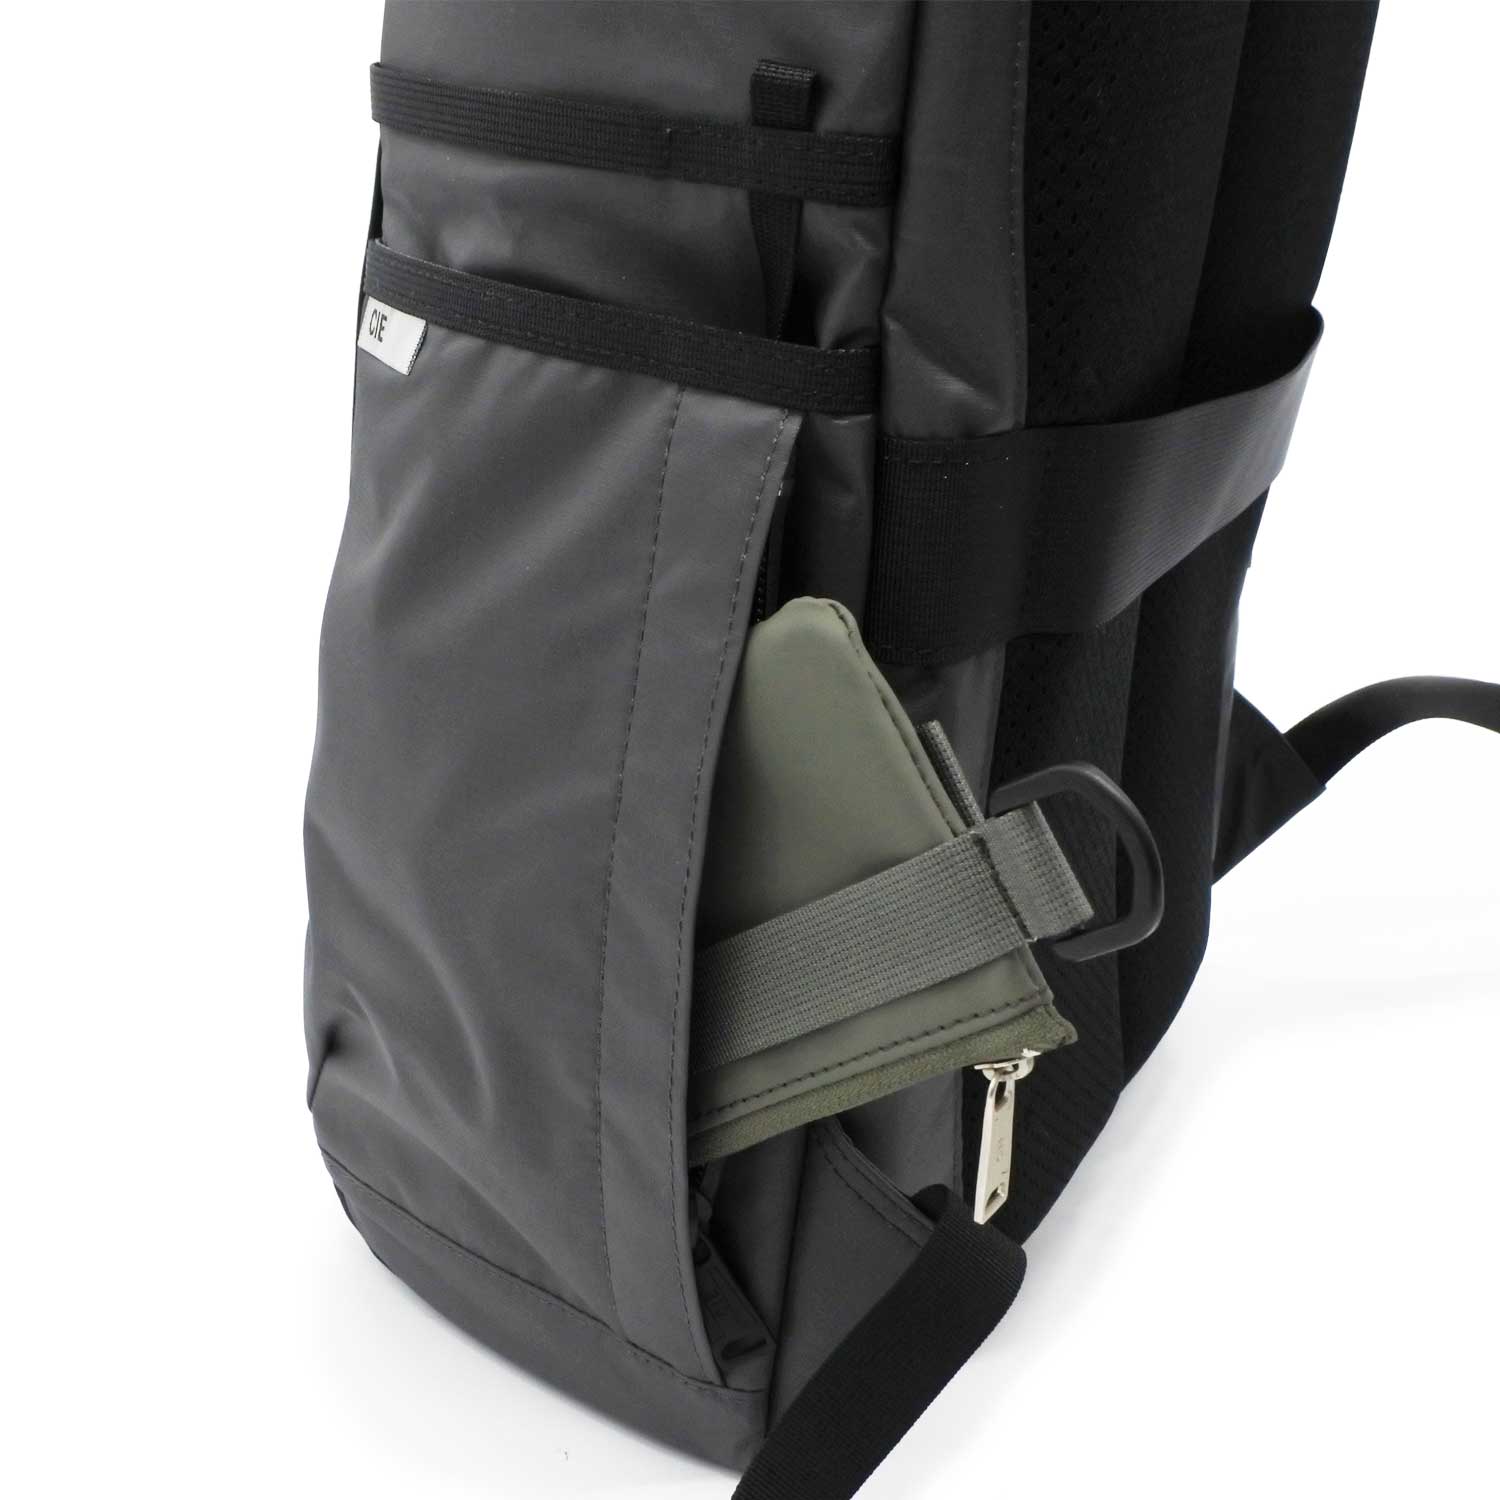 CIE-CUBE BACKPACK / LIALWORKS -リアルワークス